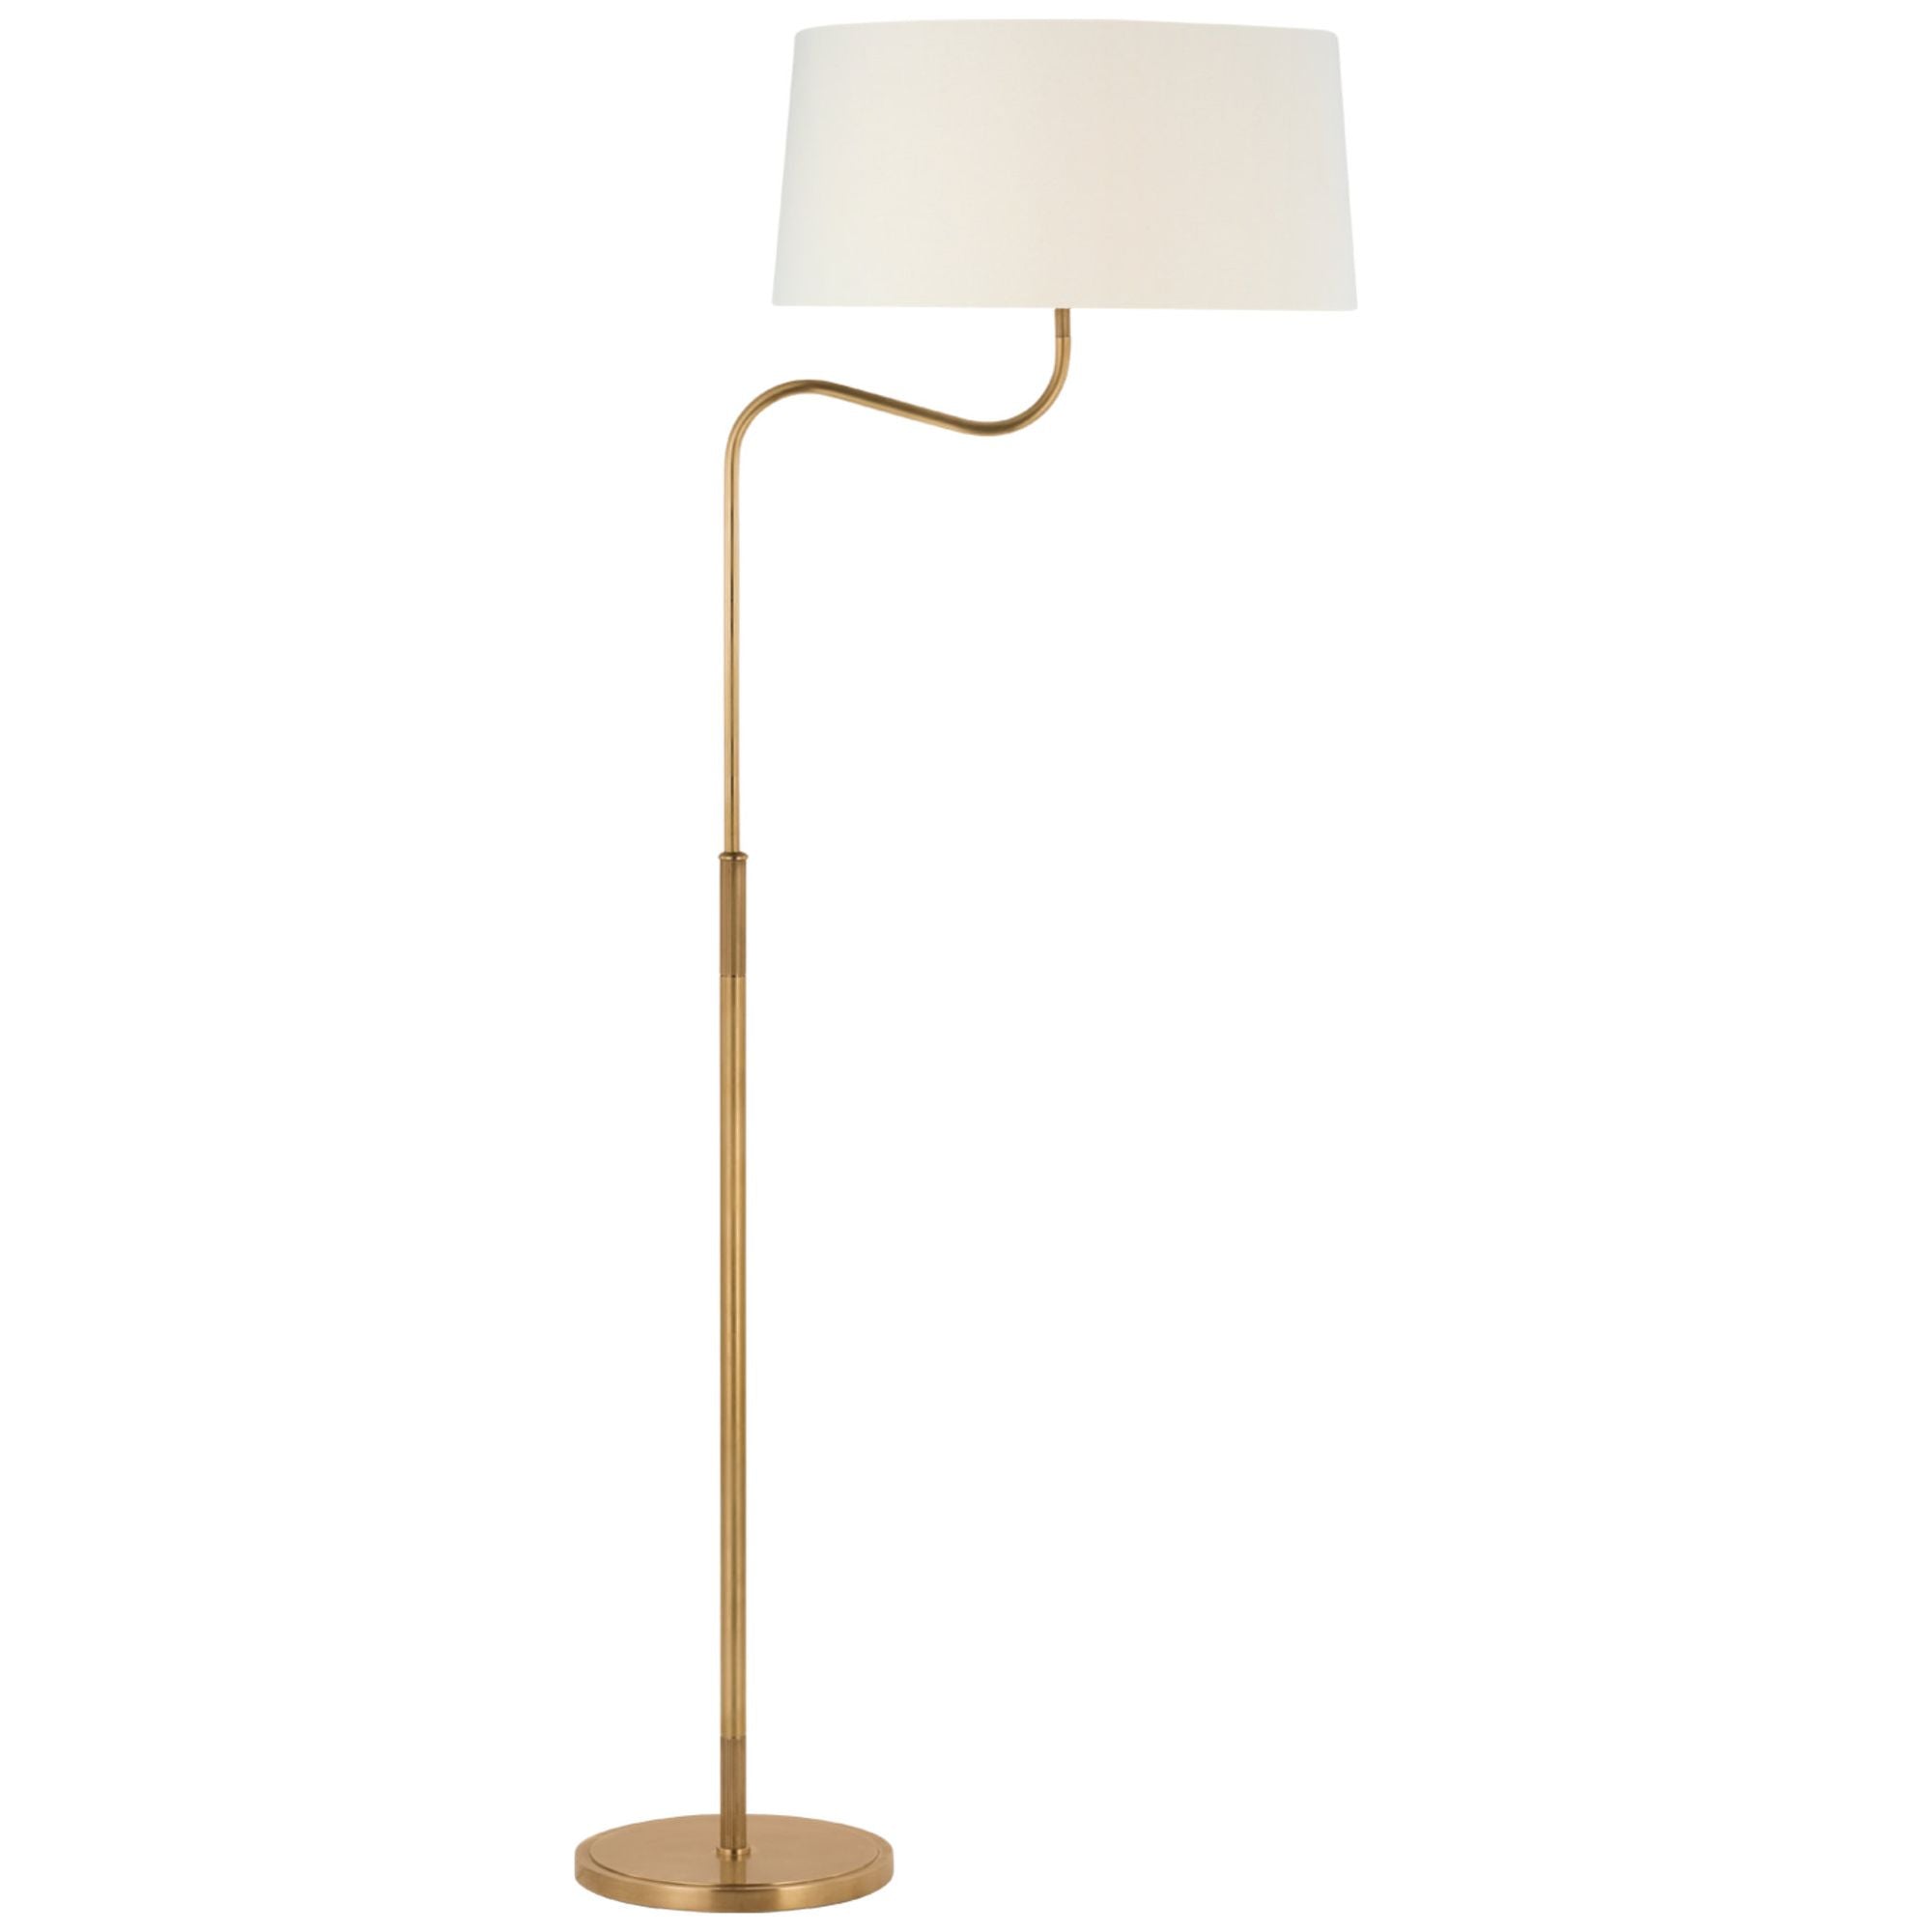 Thomas O'Brien Canto Large Adjustable Floor Lamp in Hand-Rubbed Antique Brass with Linen Shade